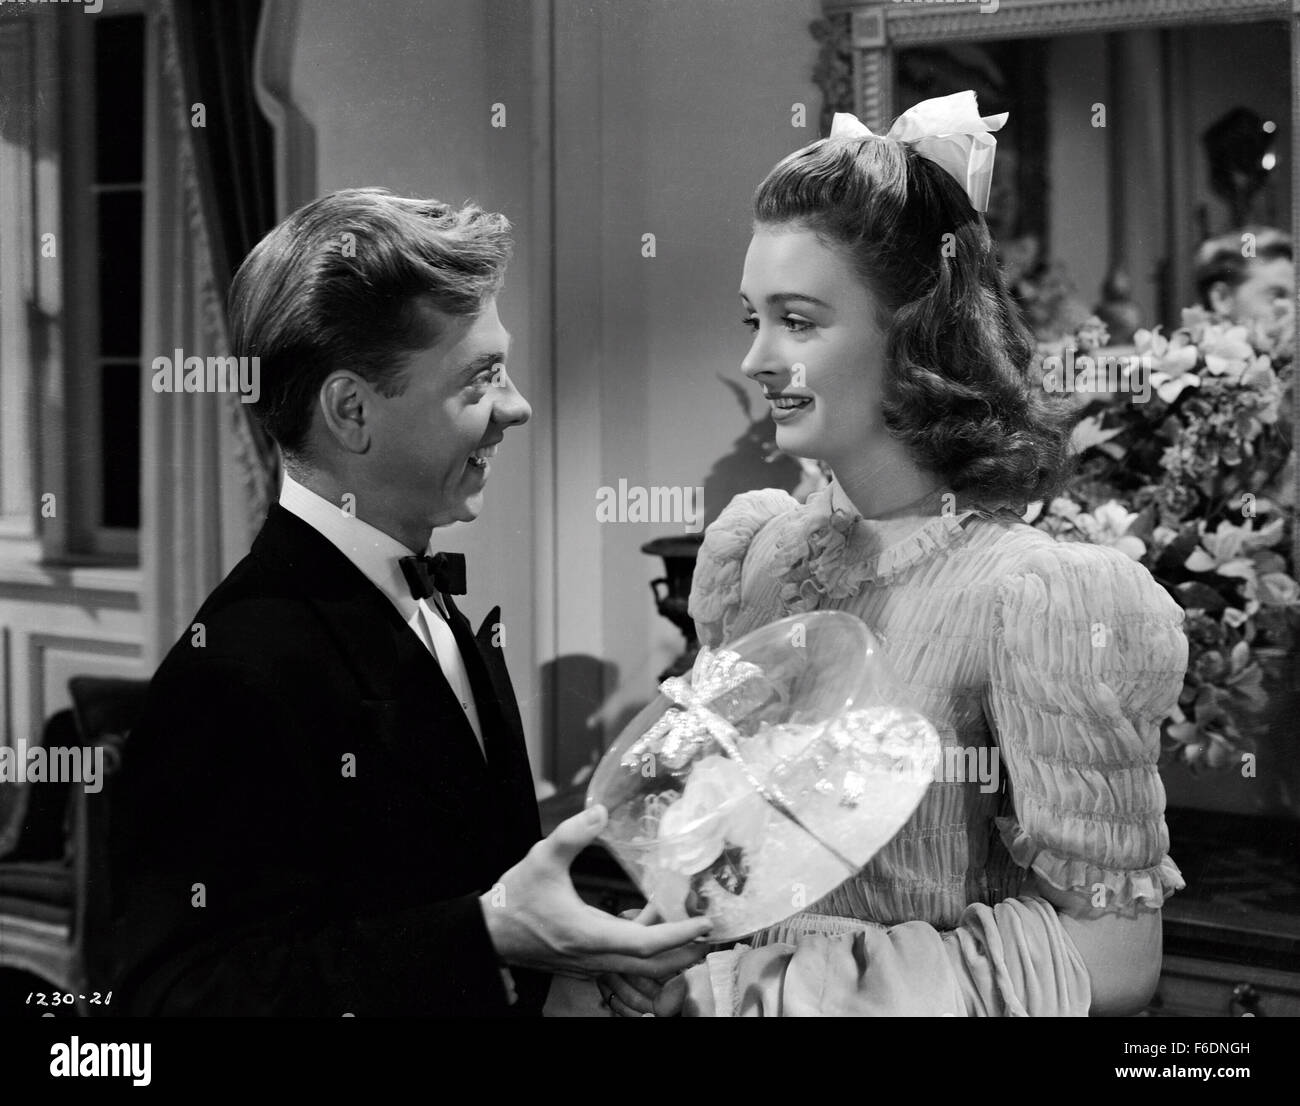 Mar 03, 1942 - Original Film Title: The Courtship of Andy Hardy. PICTURED: MICKEY ROONEY, DONNA REED. Stock Photo